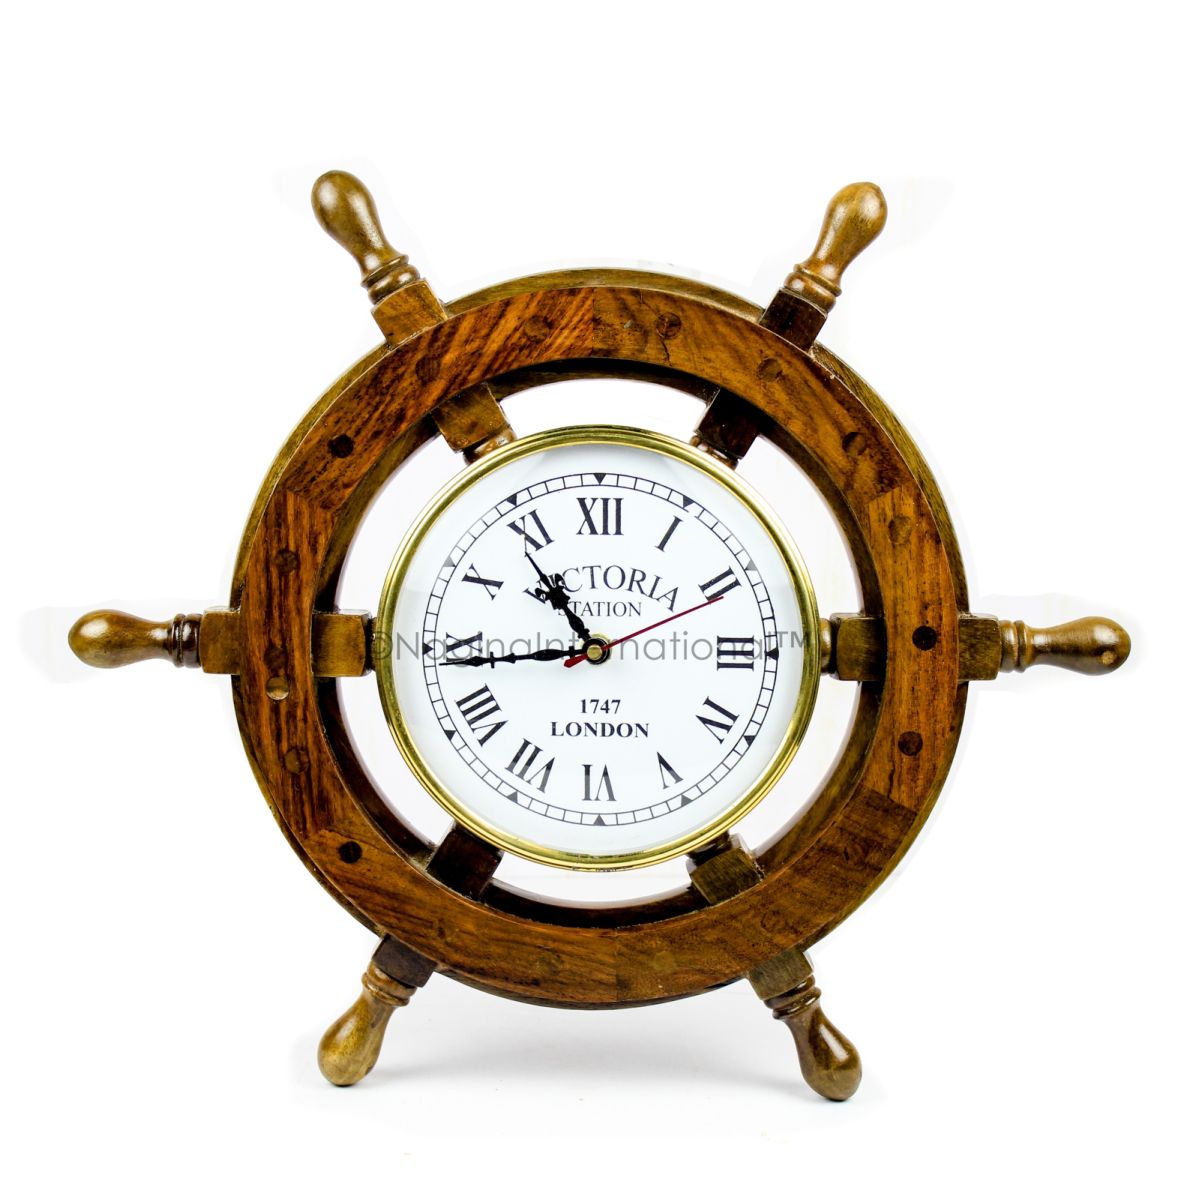 16" Hand Crafted Wooden Ship Wheel with 6" Wall Decor Premium Vintage Roman Dial Time's Clock | Maritime Decorative Exclusive Wall Decor Clock | Nagina International